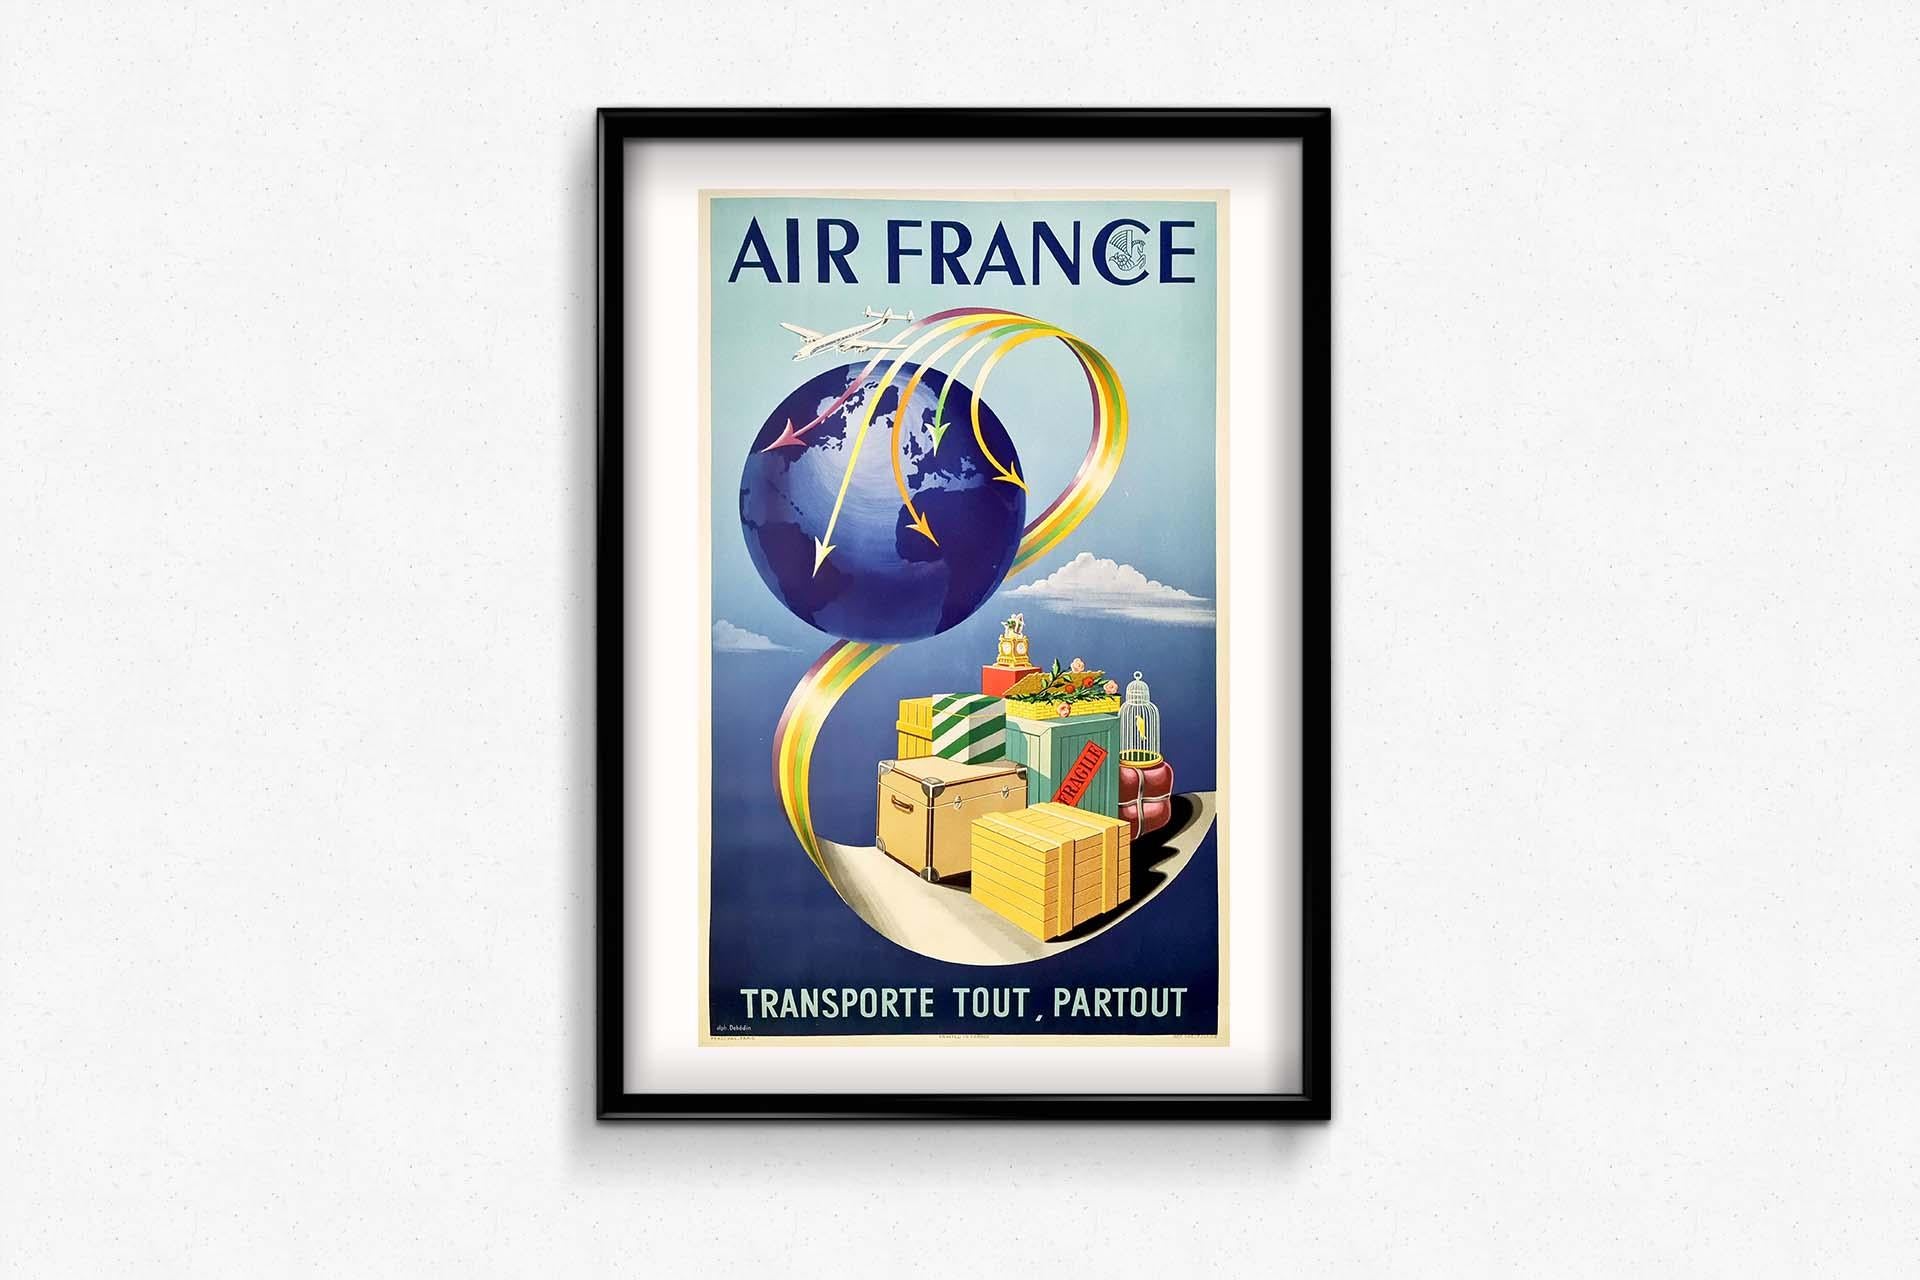 Very beautiful poster realized in 1952 by Dehédin for the Air France company, this mythical airline founded in 1933, which always tried to develop a solid poster policy. The poster, by its universality, its ease of understanding, its spontaneous